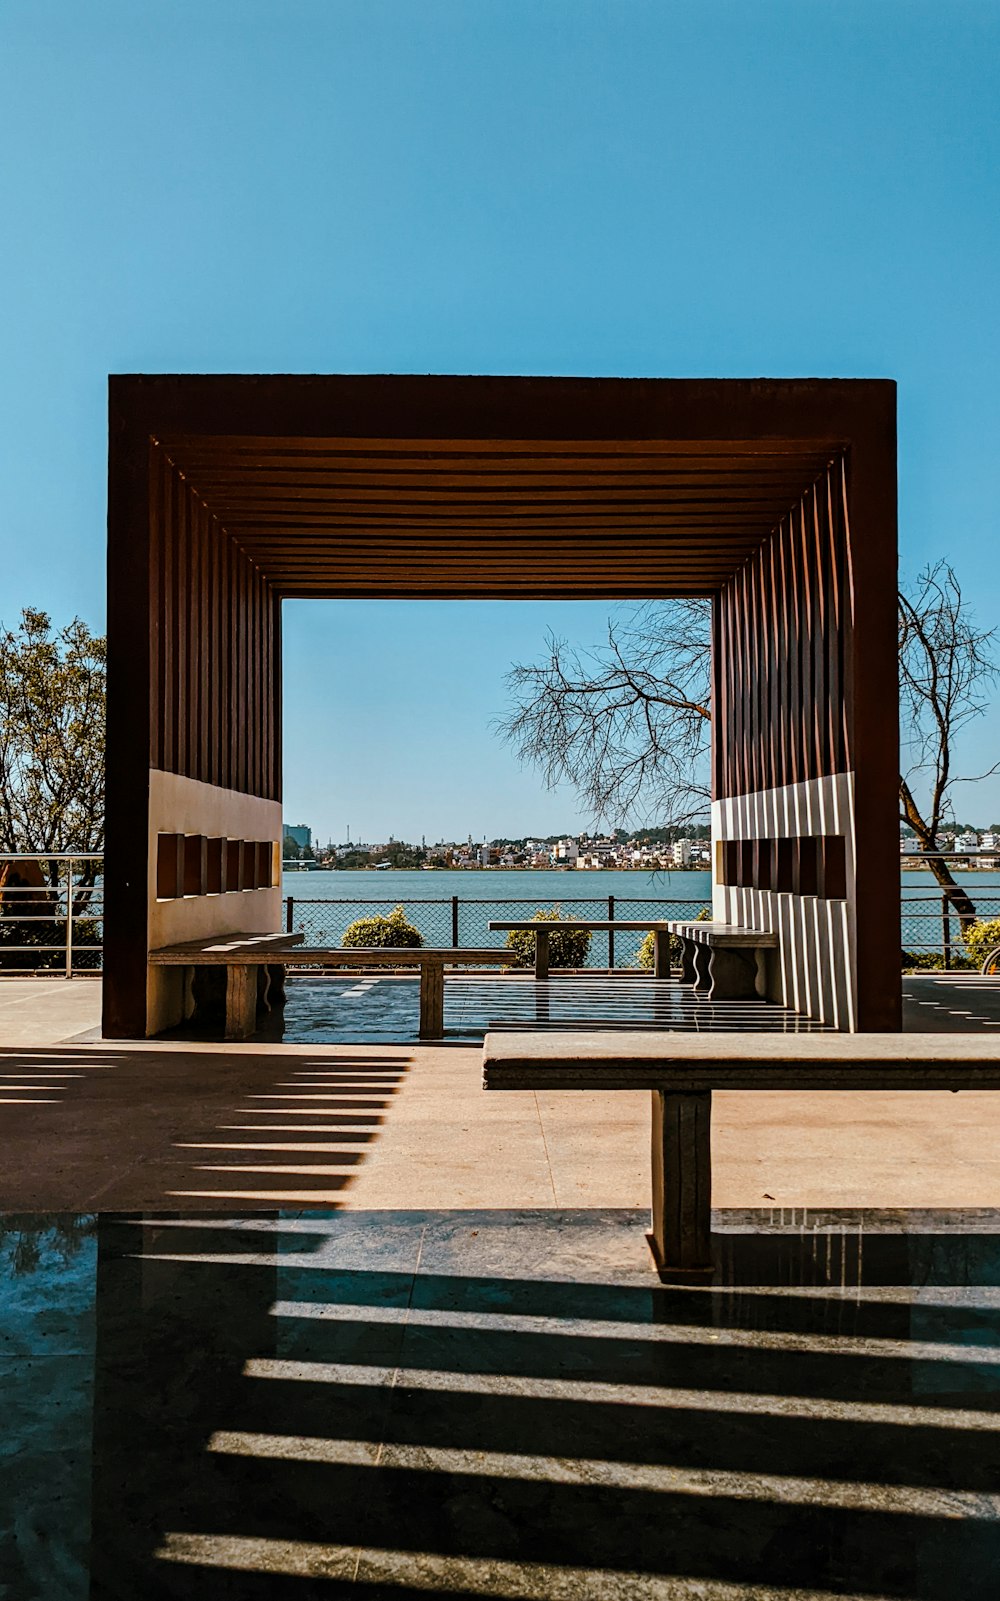 a bench sitting under a wooden structure next to a body of water